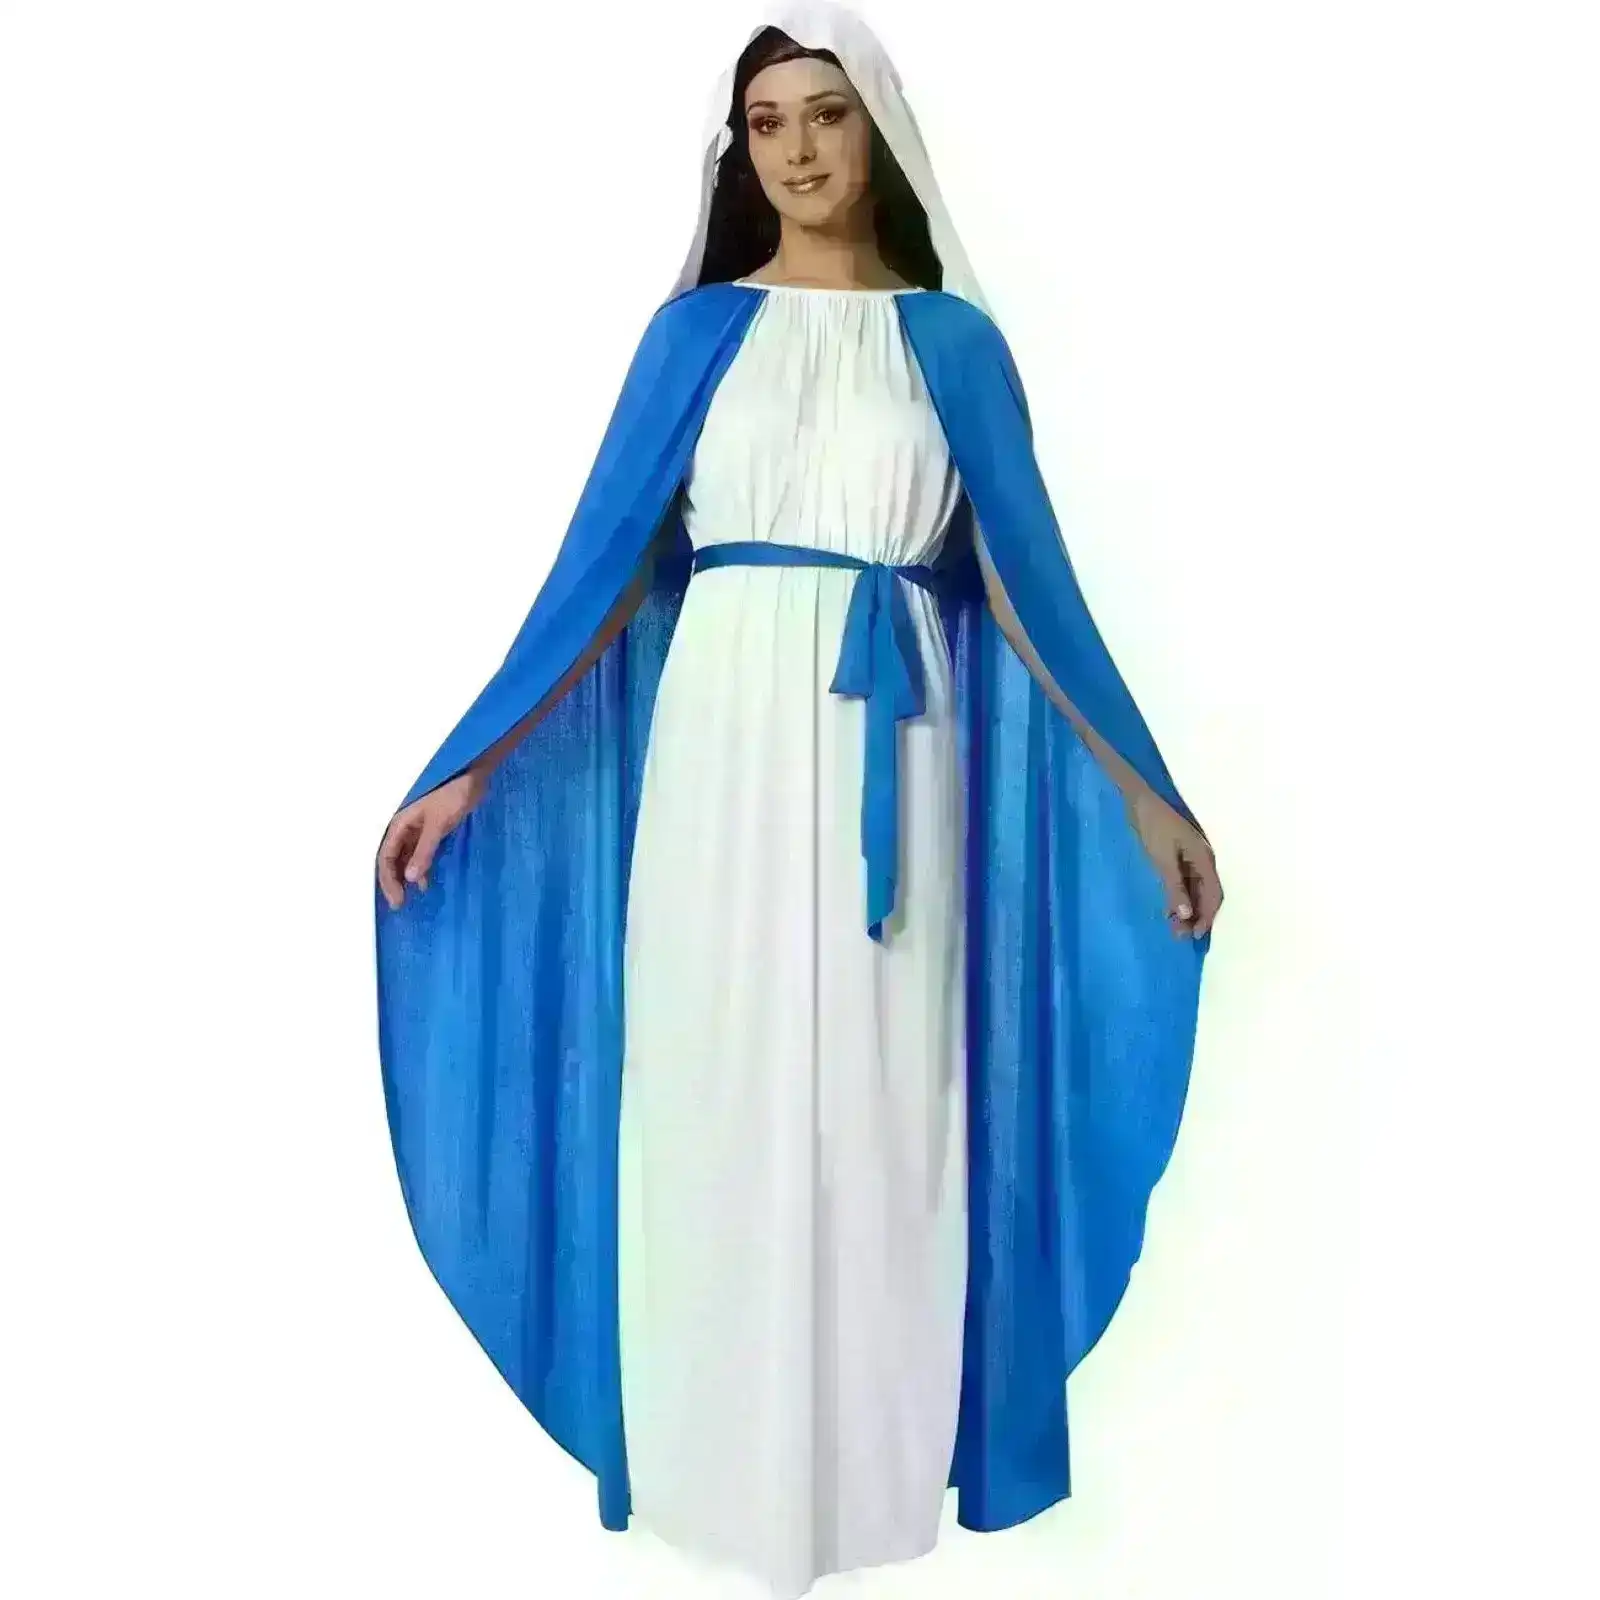 VIRGIN MARY COSTUME Fancy Dress Cosplay Christmas Party Outfit Holy Saint Mother